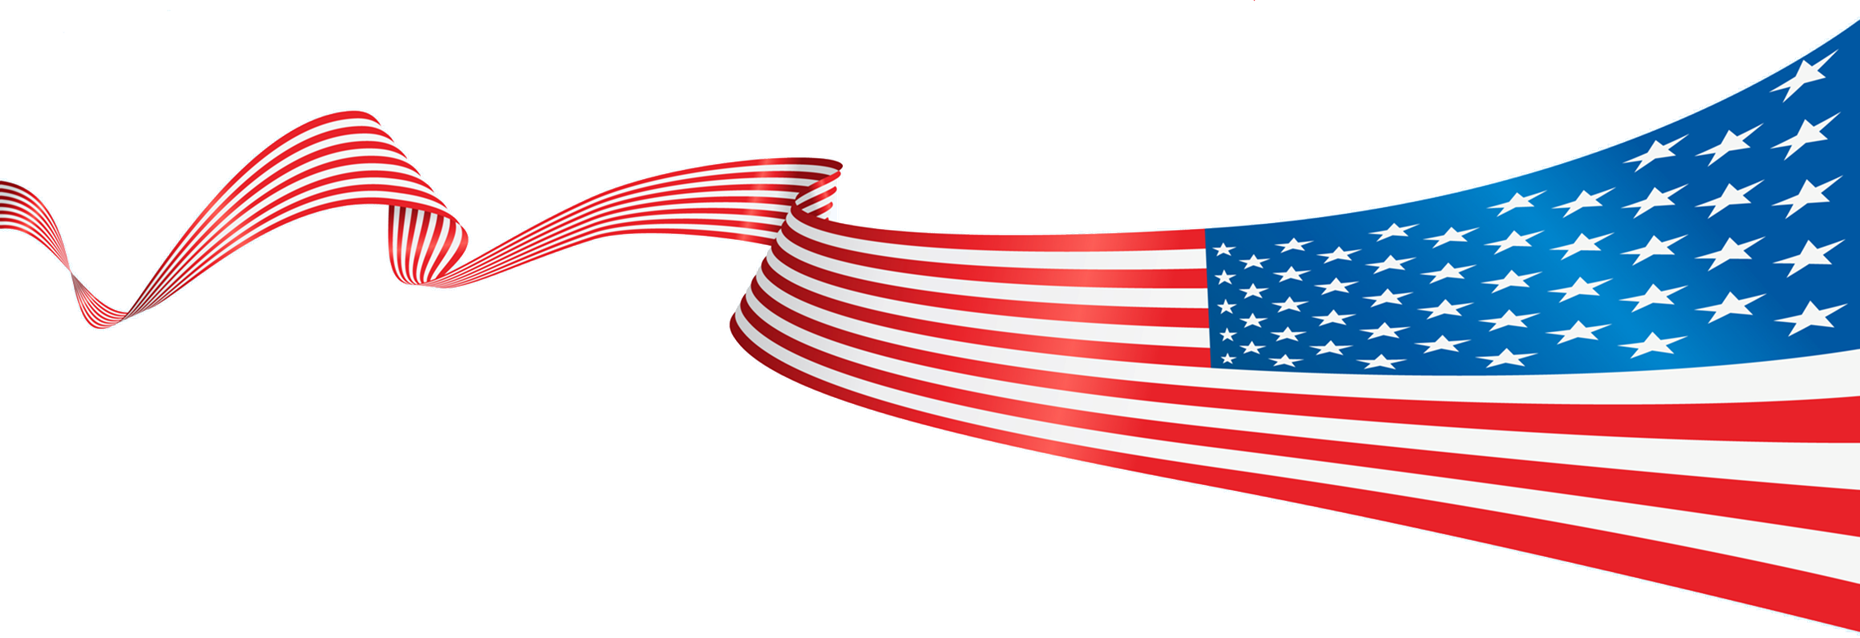 united states clipart banner american